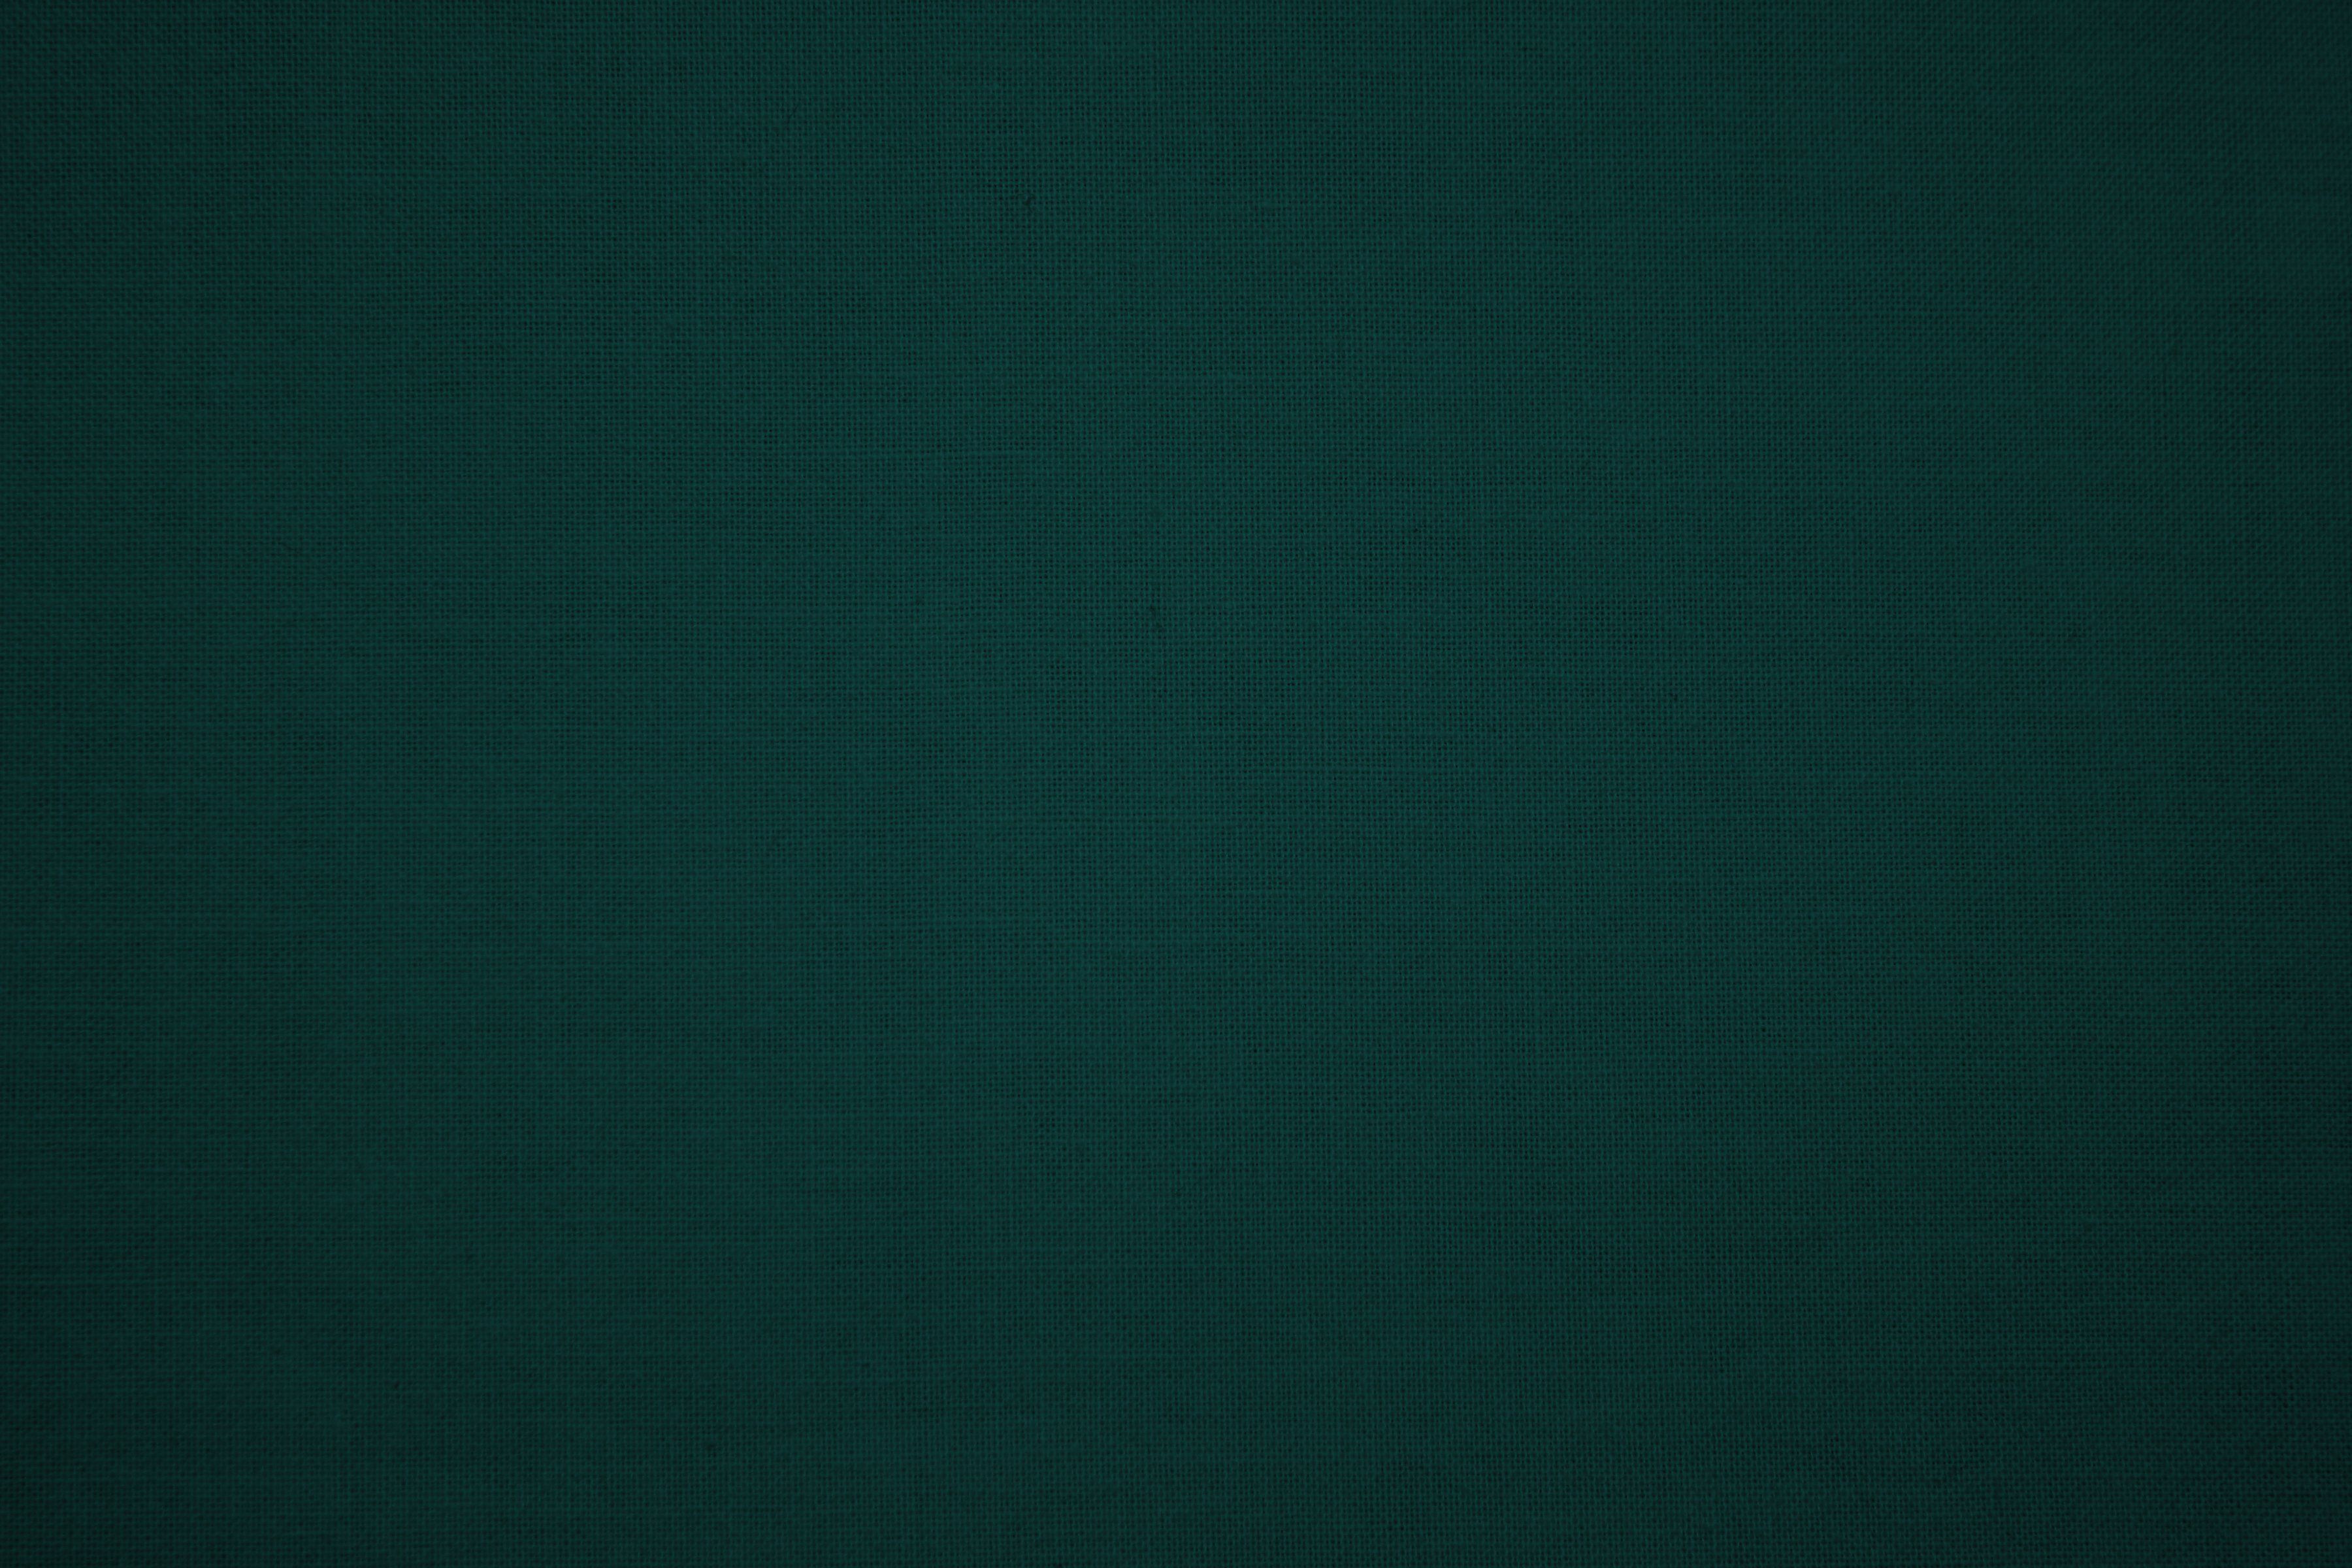 Dark Teal Canvas Fabric Texture Picture. Free Photograph. Tufted headboard, Skyline furniture, Fabric